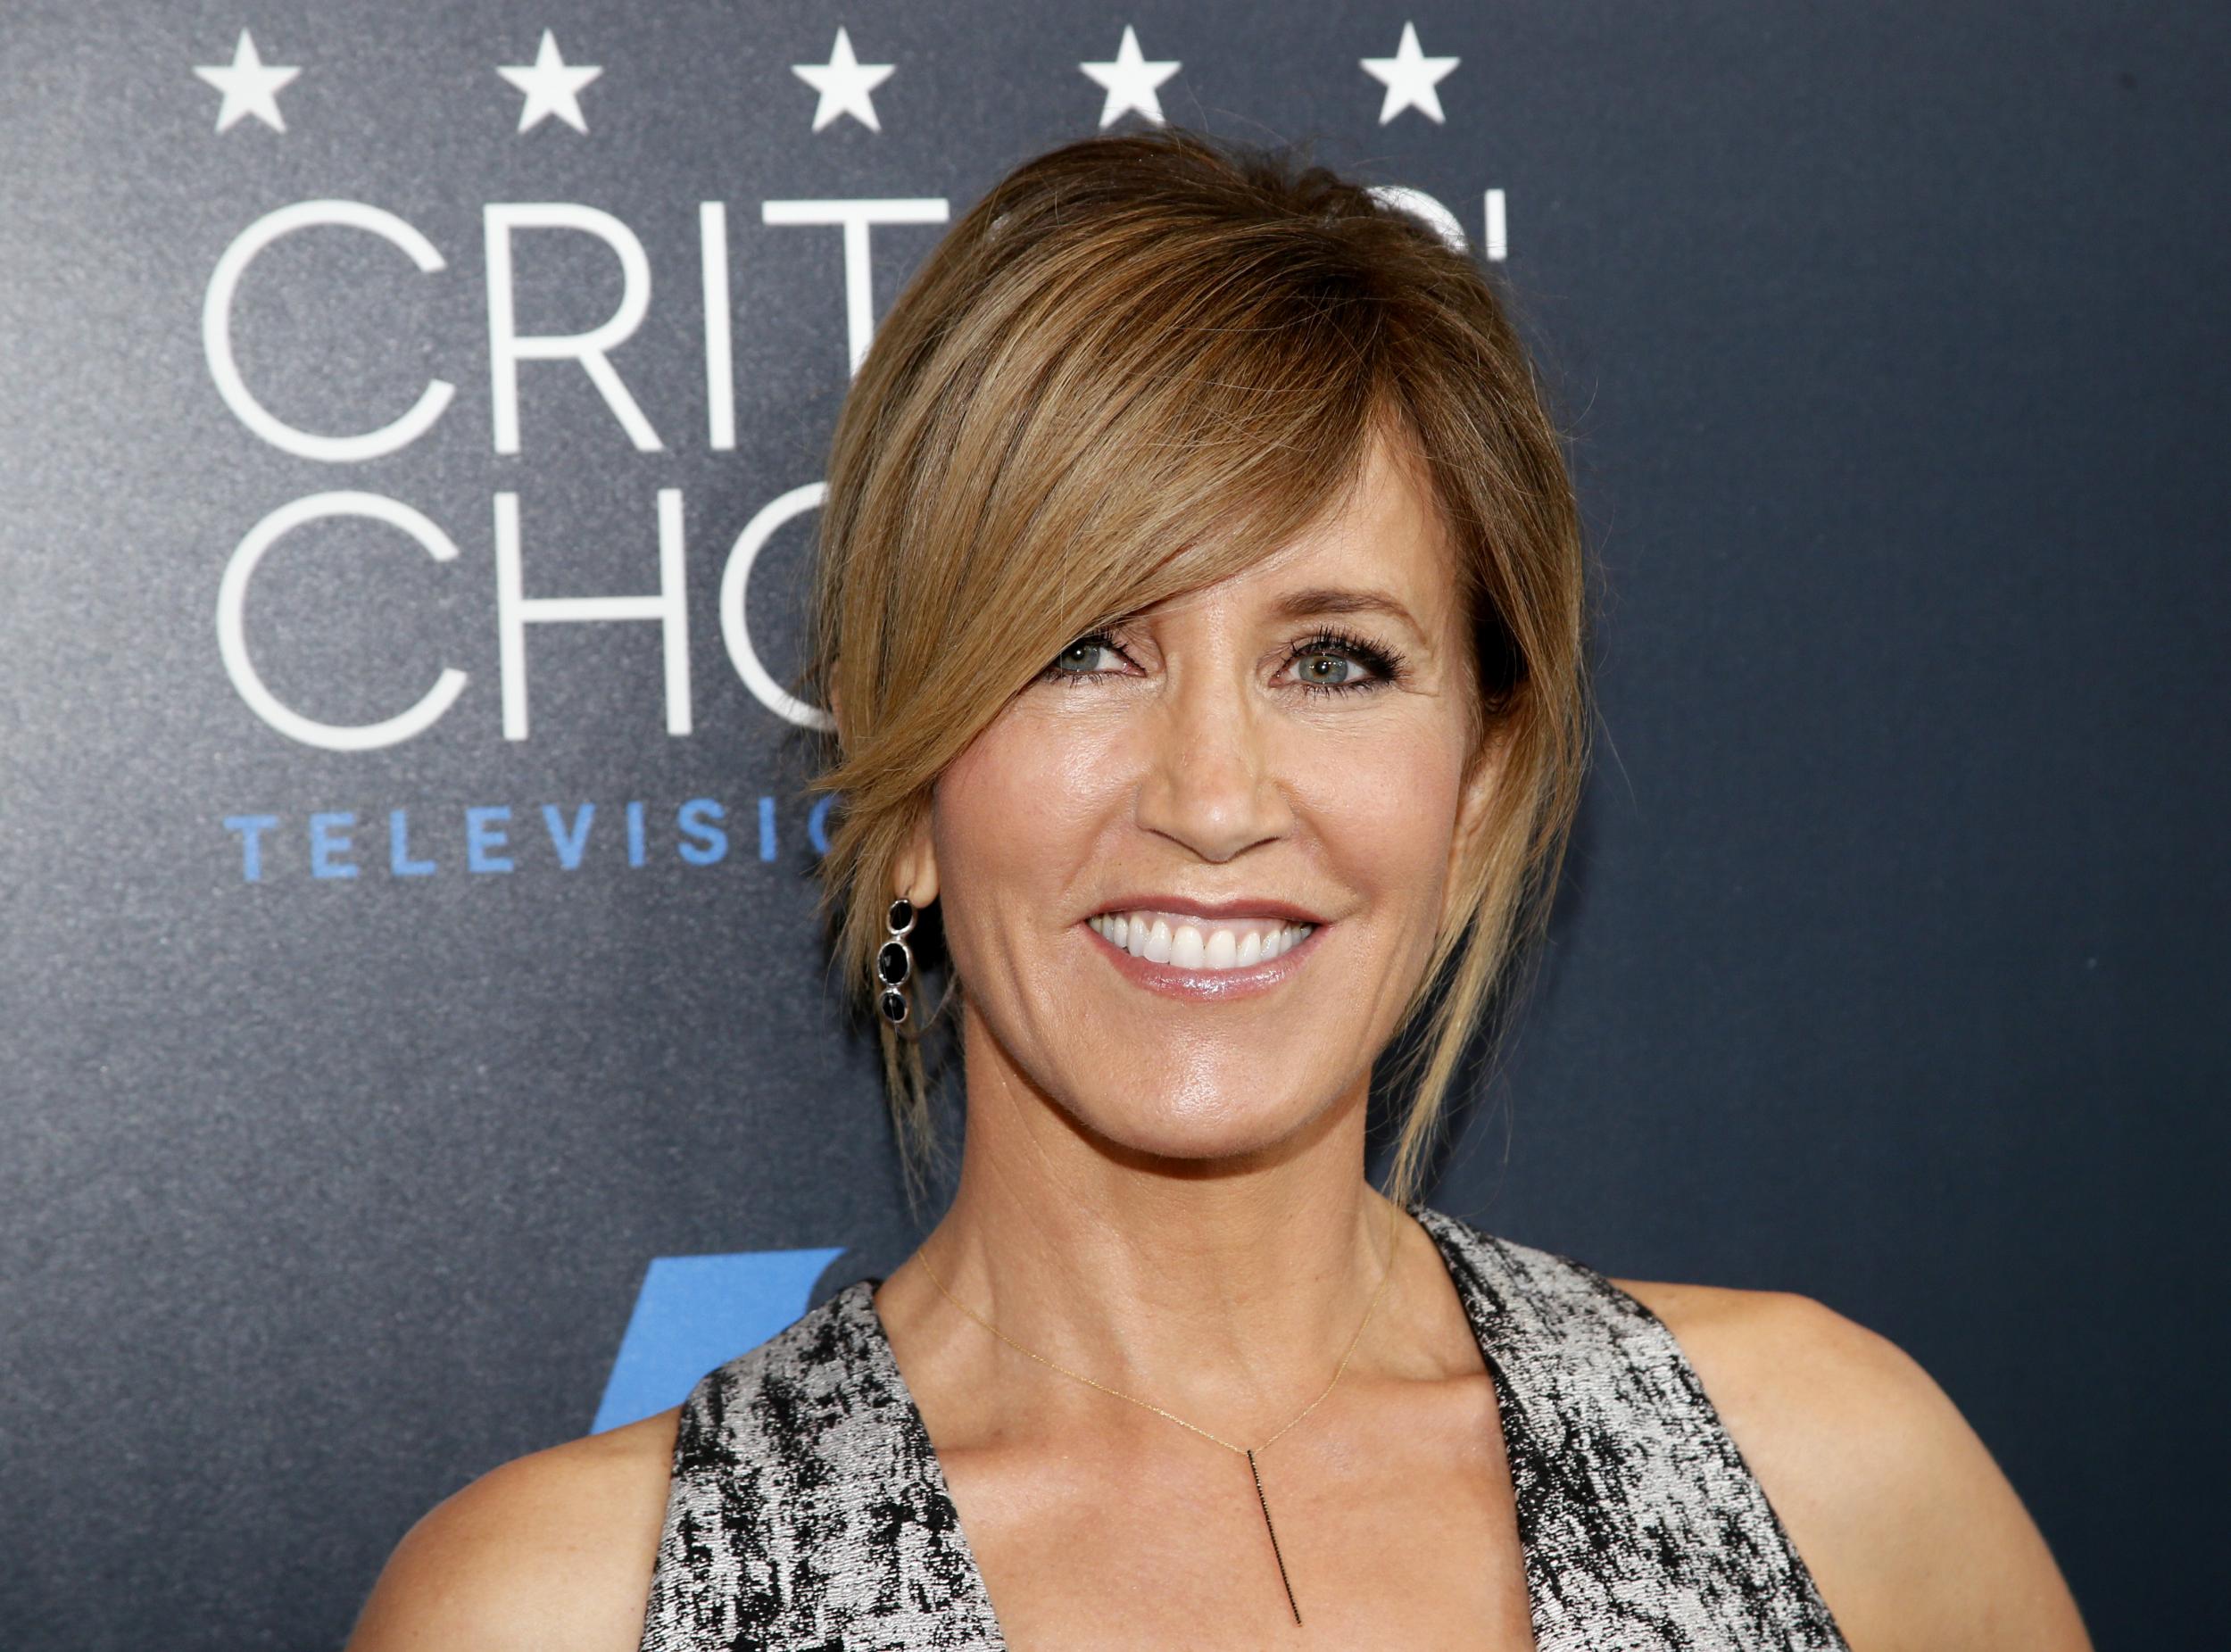 Felicity Huffman is the latest star to confirm her attendance